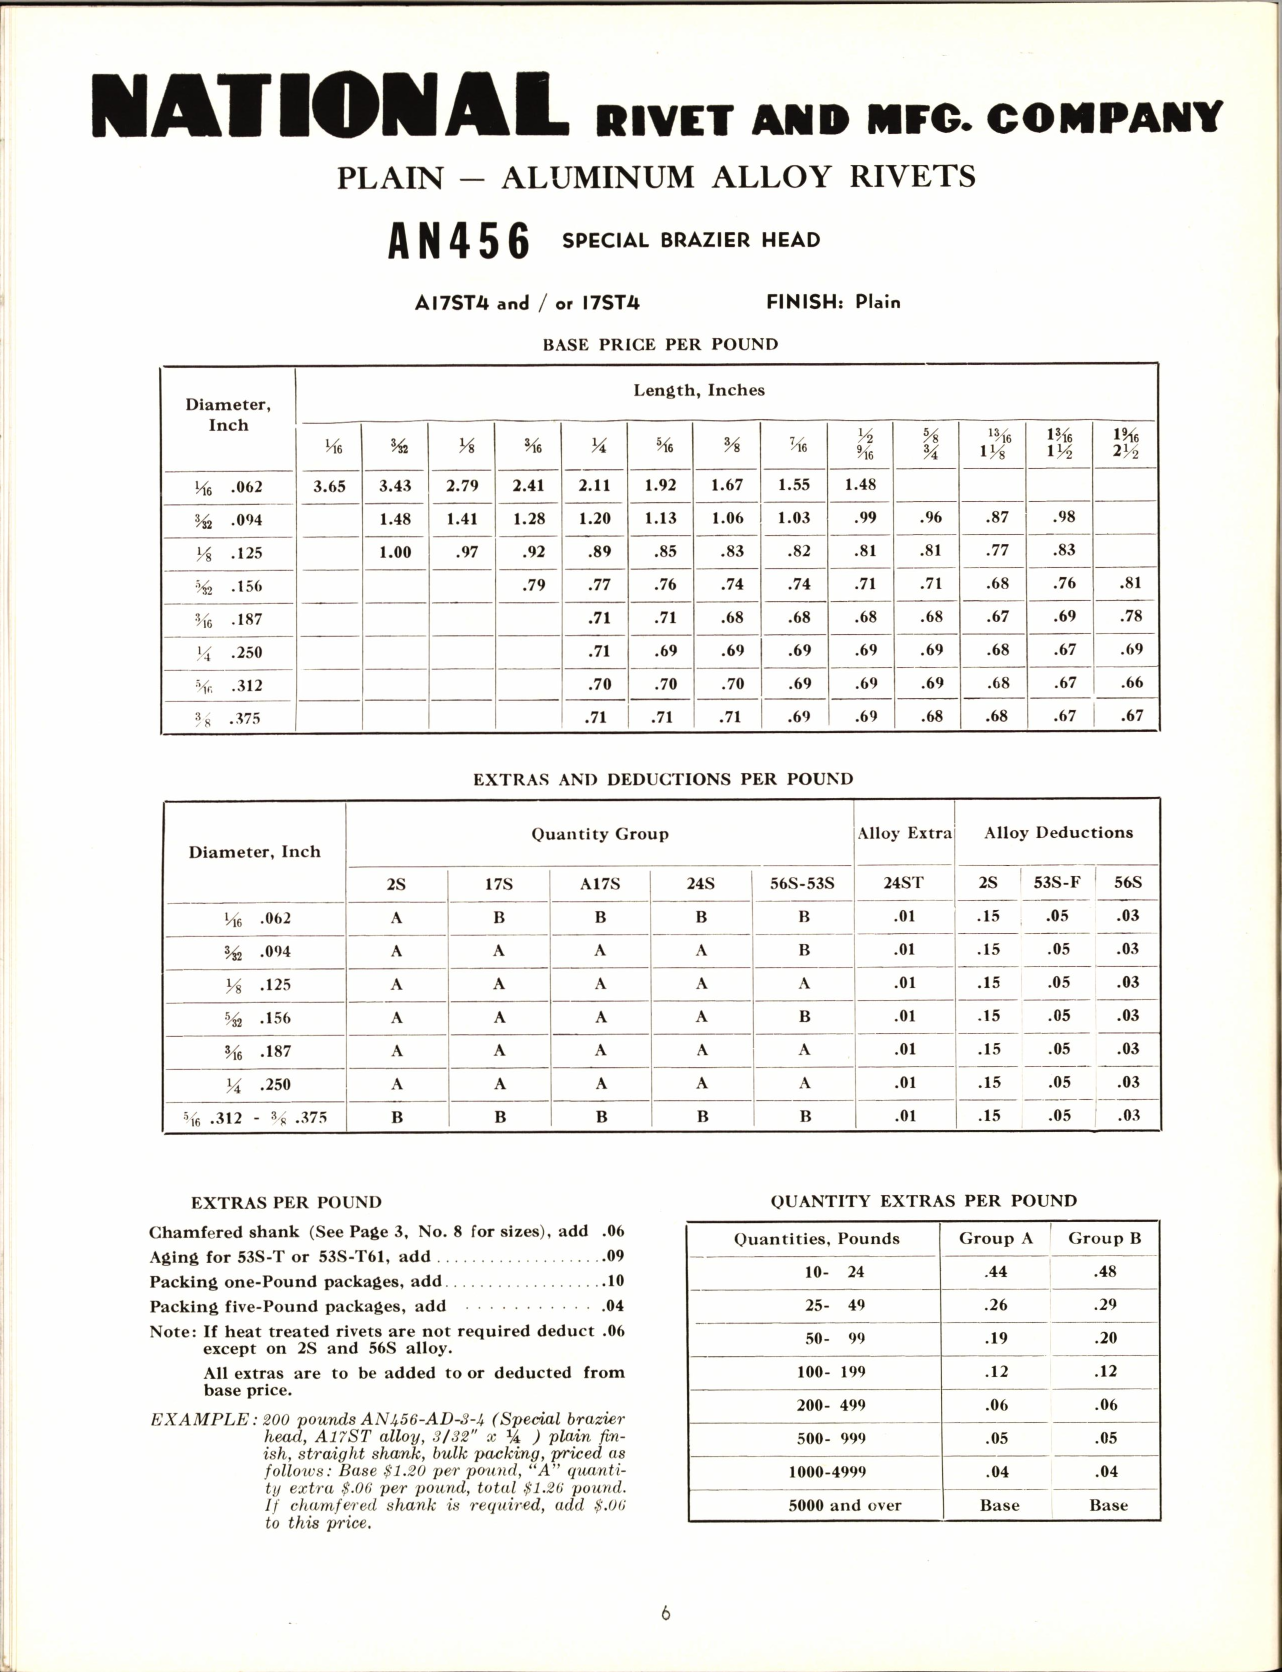 Sample page 7 from AirCorps Library document: Aircraft Solid Rivets - National Rivet & Mgf Co